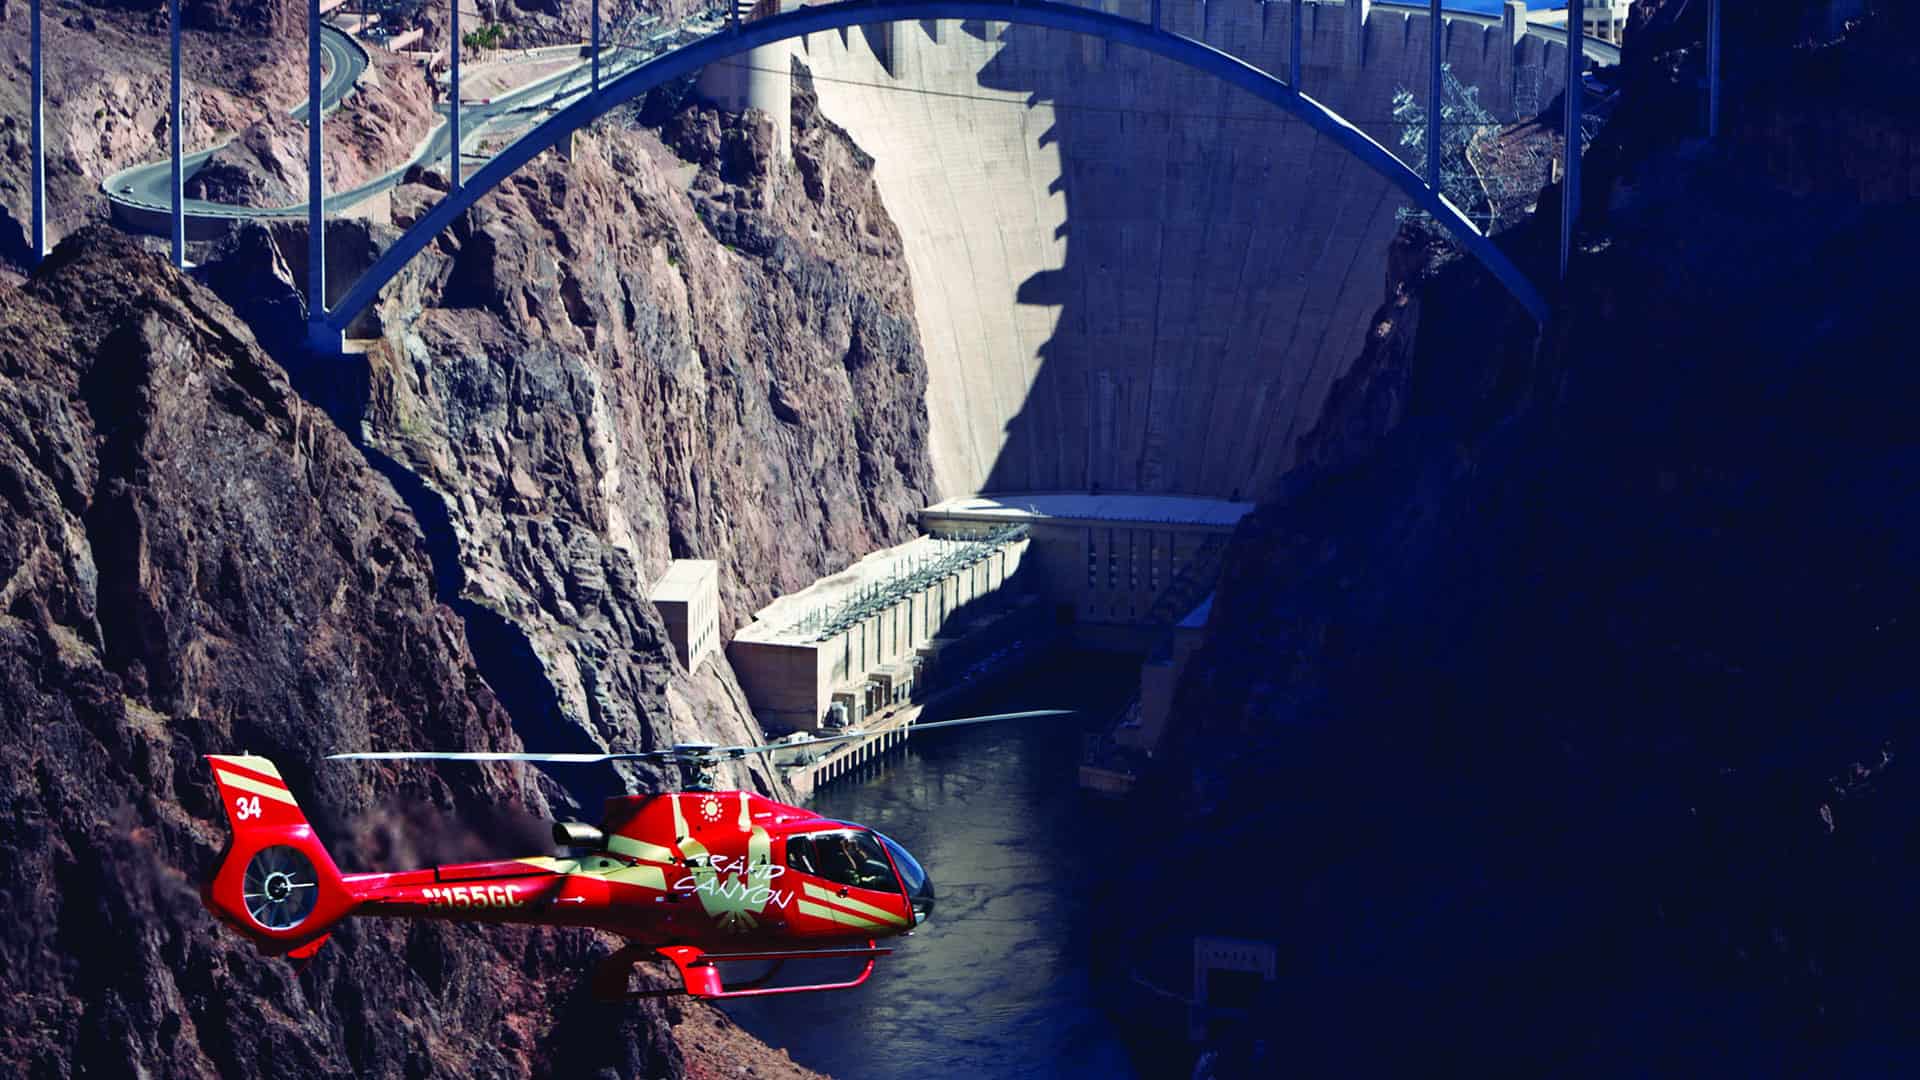 Tinggly Helicopter Ride Over the Hoover Dam - Romantic places in Las Vegas